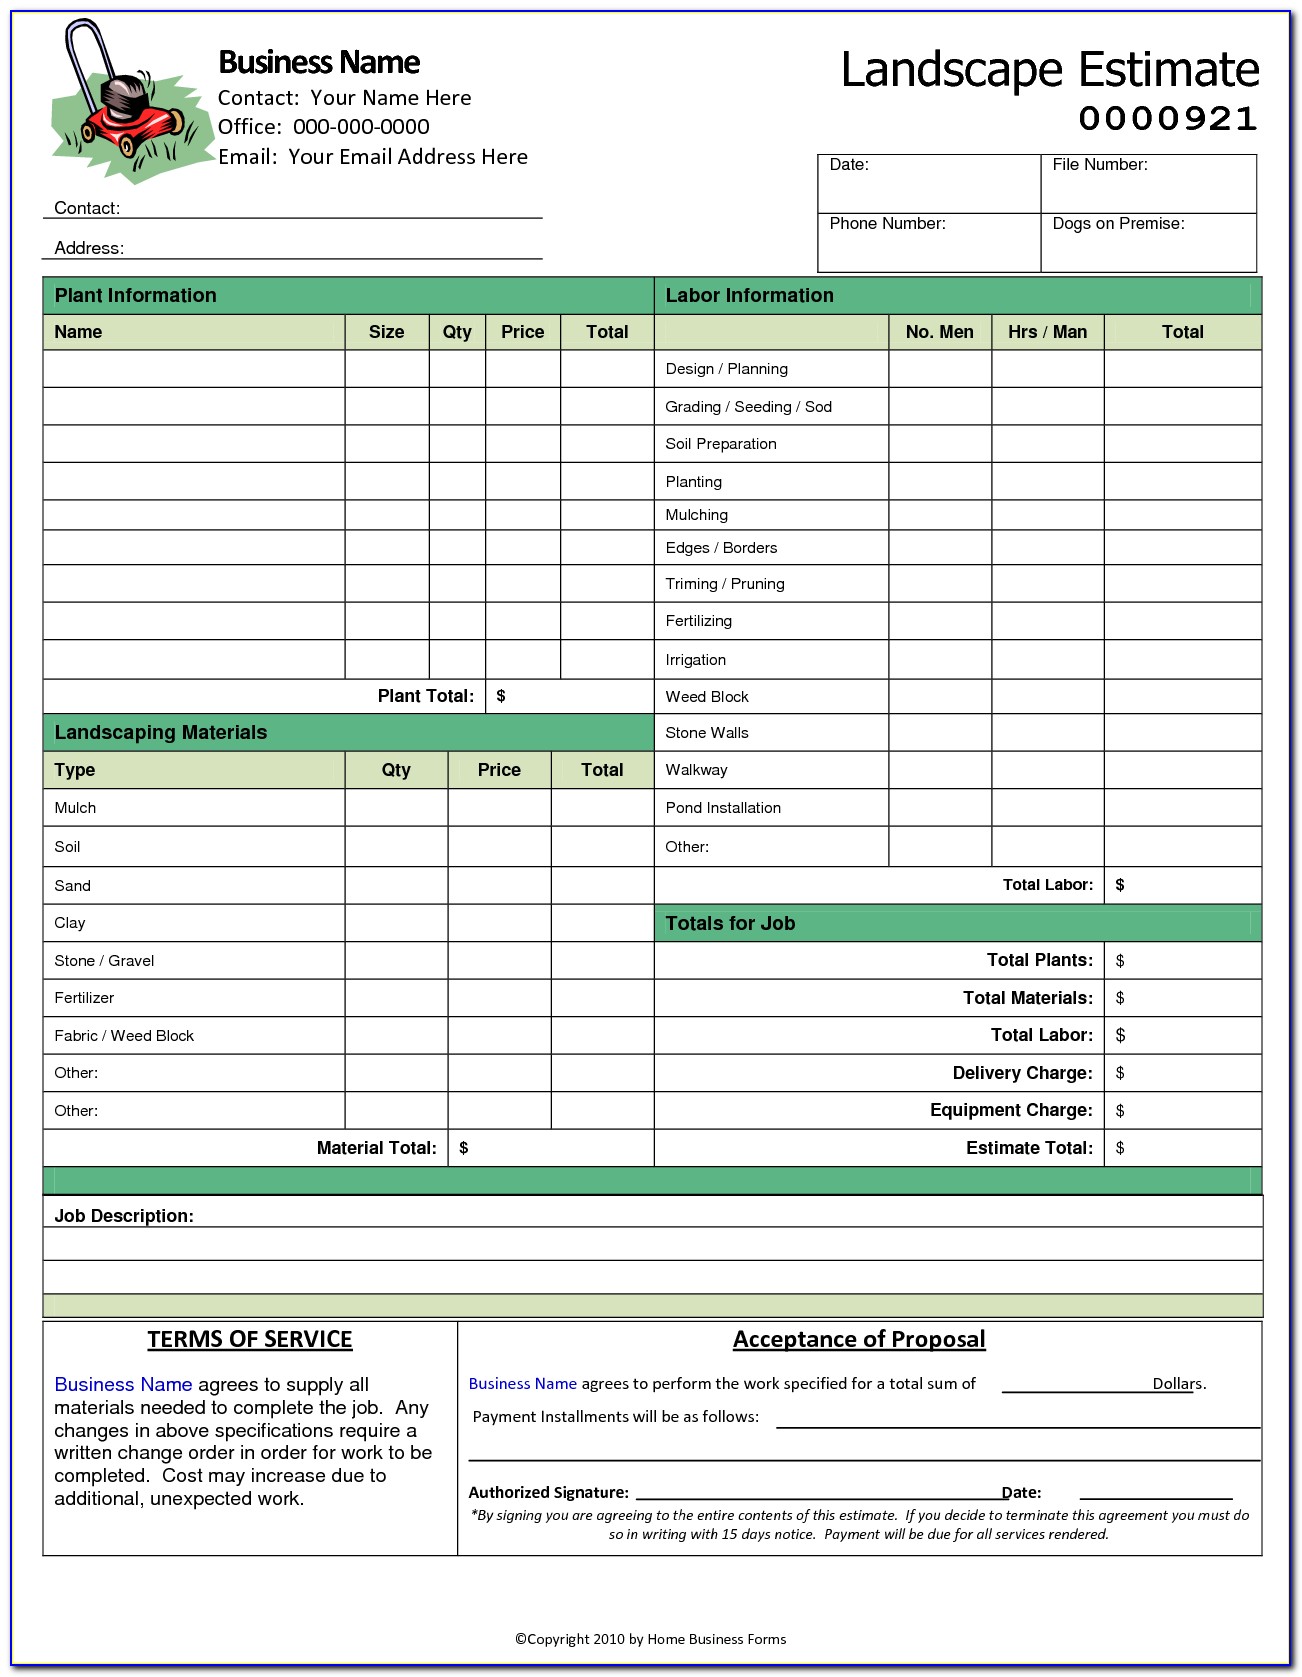 Lawn Care Brochure Templates Brochures Resume Examples a15qMby15e